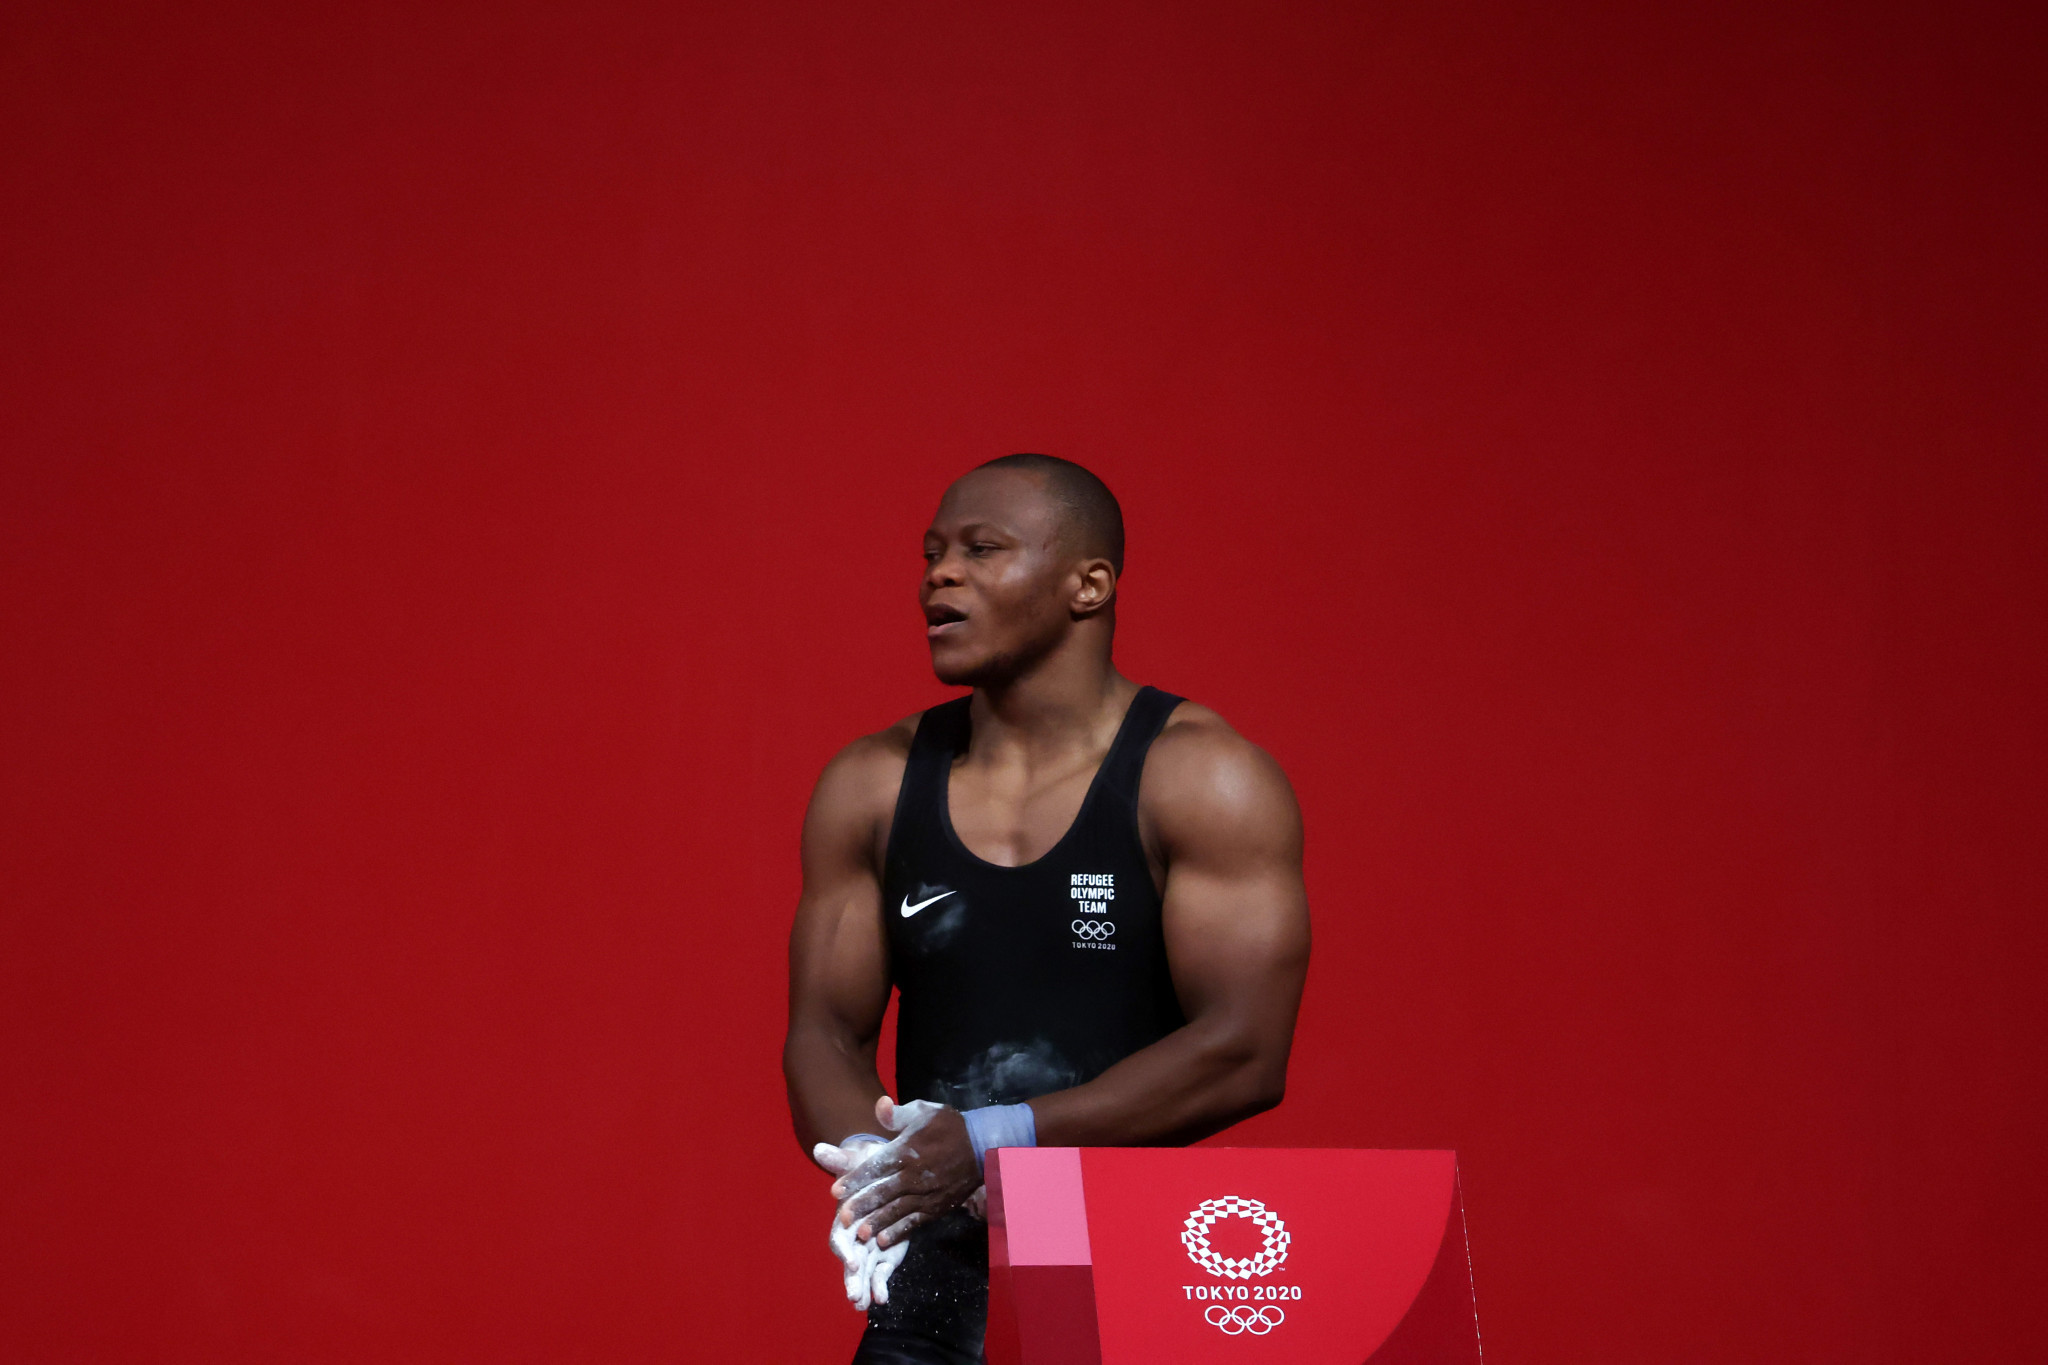 Cyrille Tchatchet competed for the IOC Refugee Team in weightlifting at the Tokyo 2020 Olympics ©Getty Images